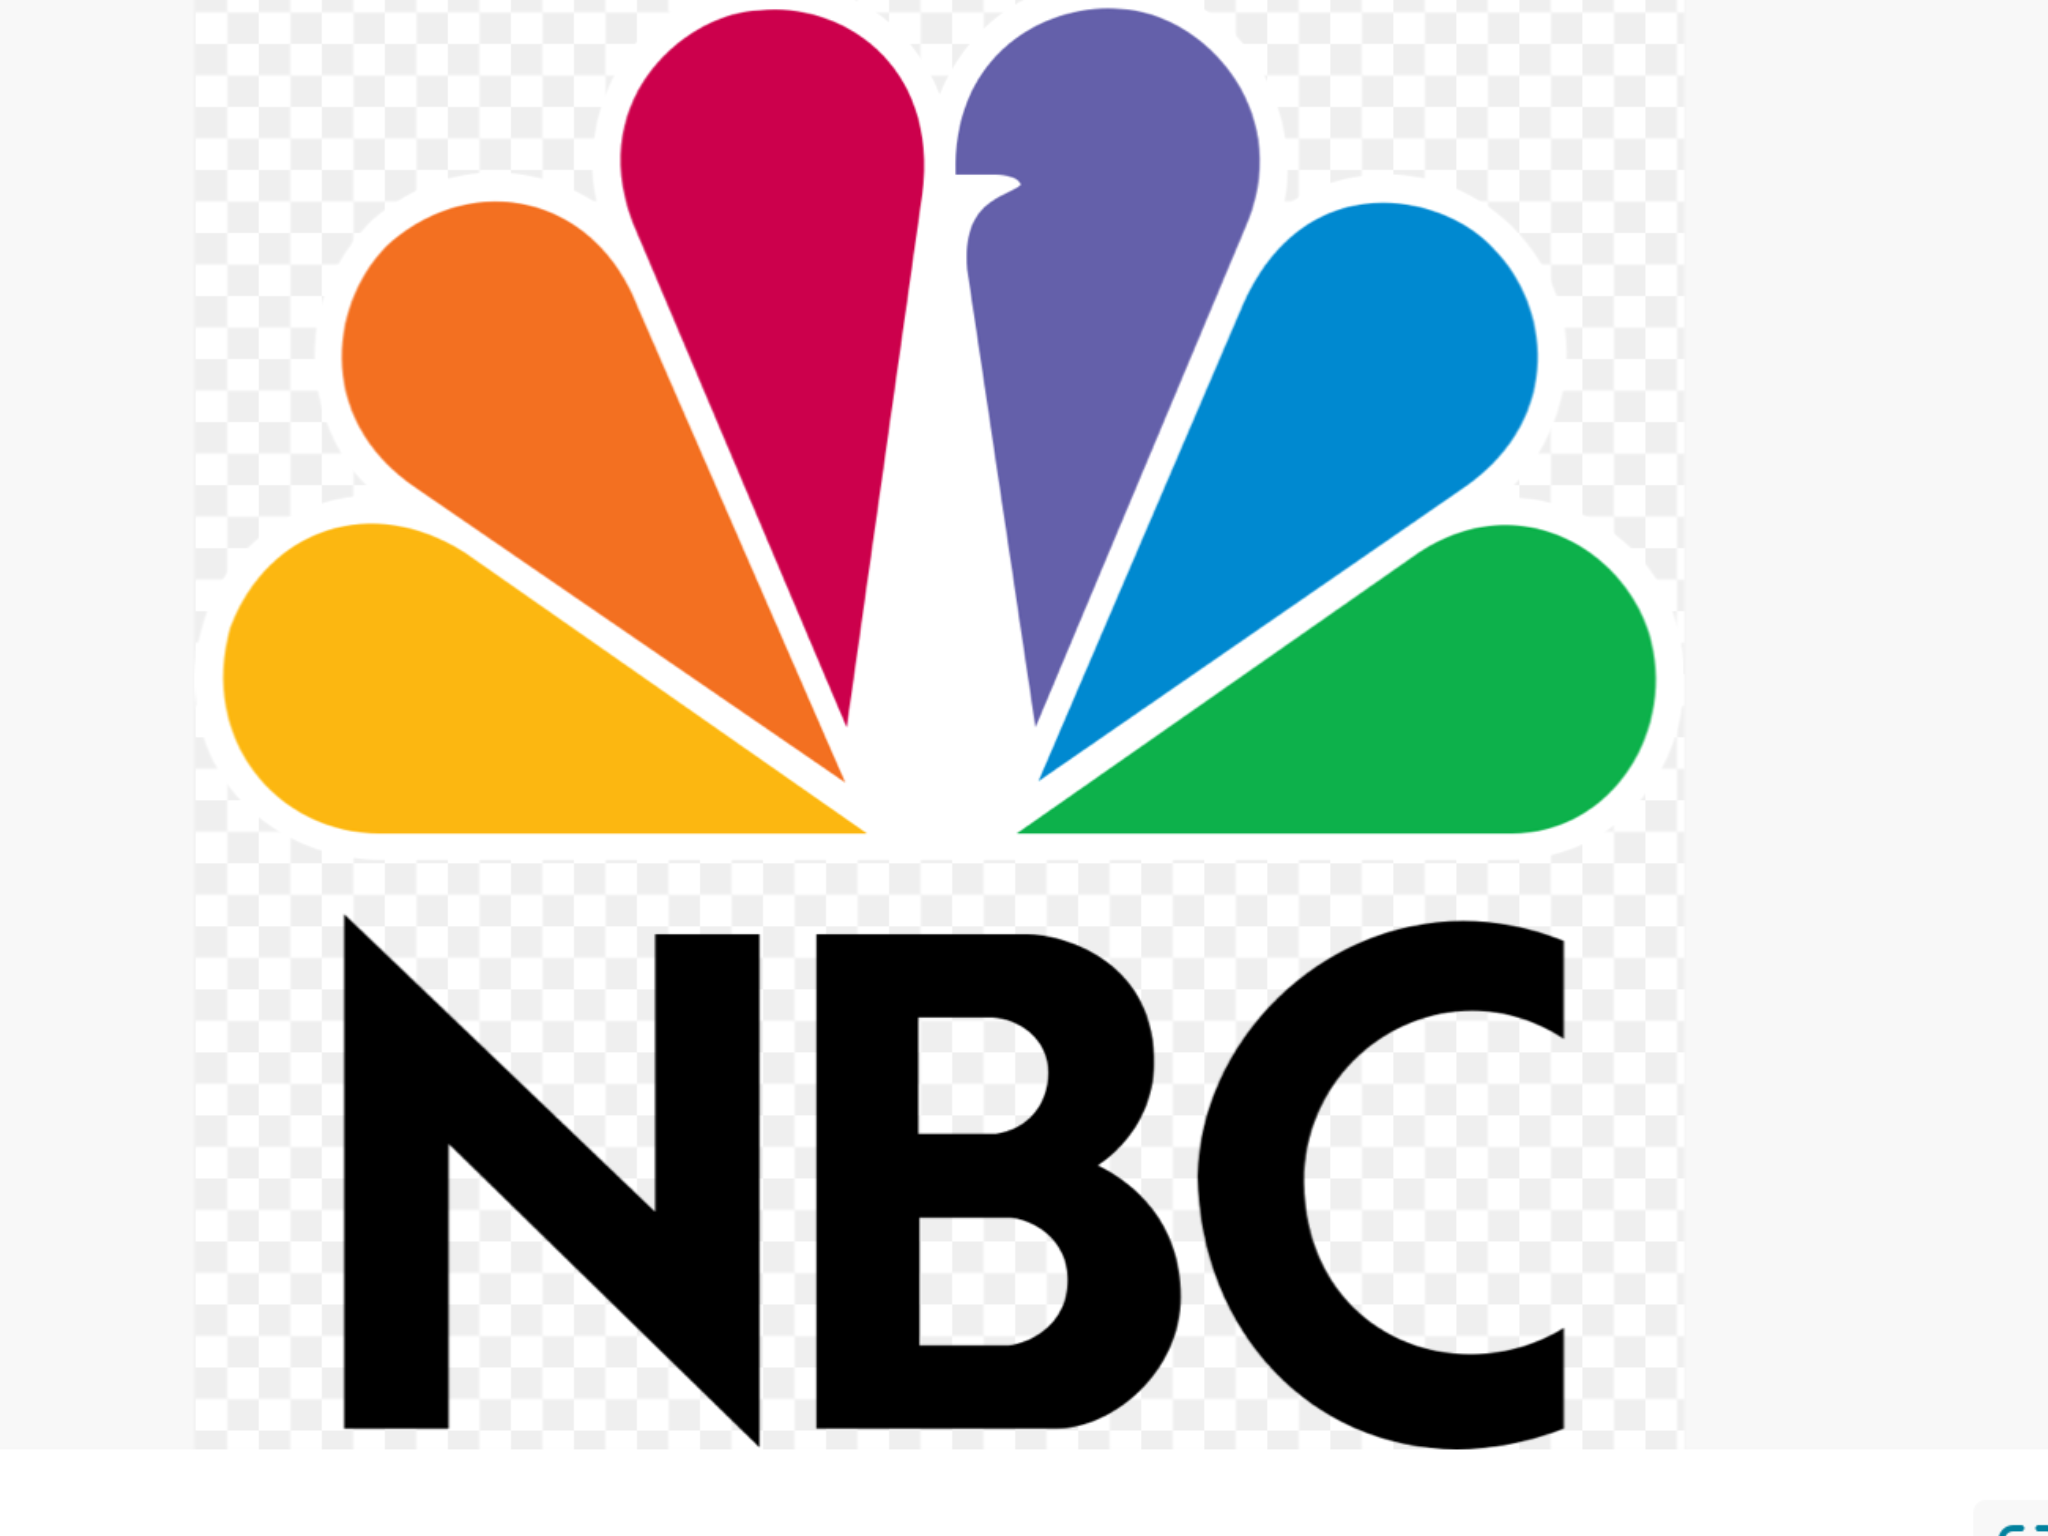 NBC stands for NoBodyCares